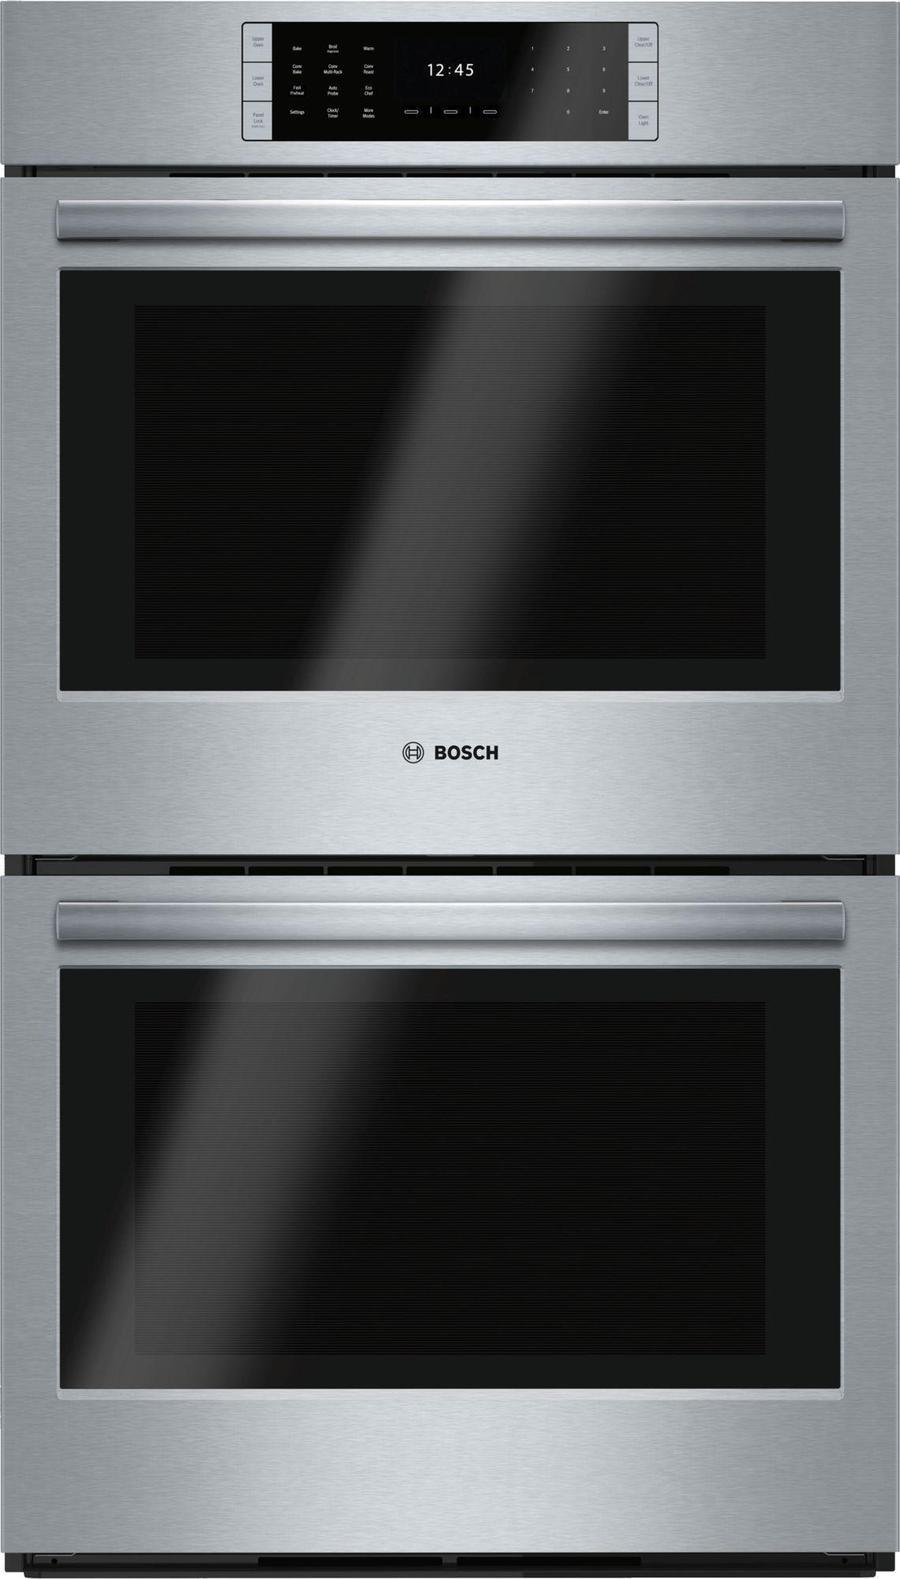 Bosch - 4.6 cu. ft Double Wall Oven in Stainless - HBLP651UC